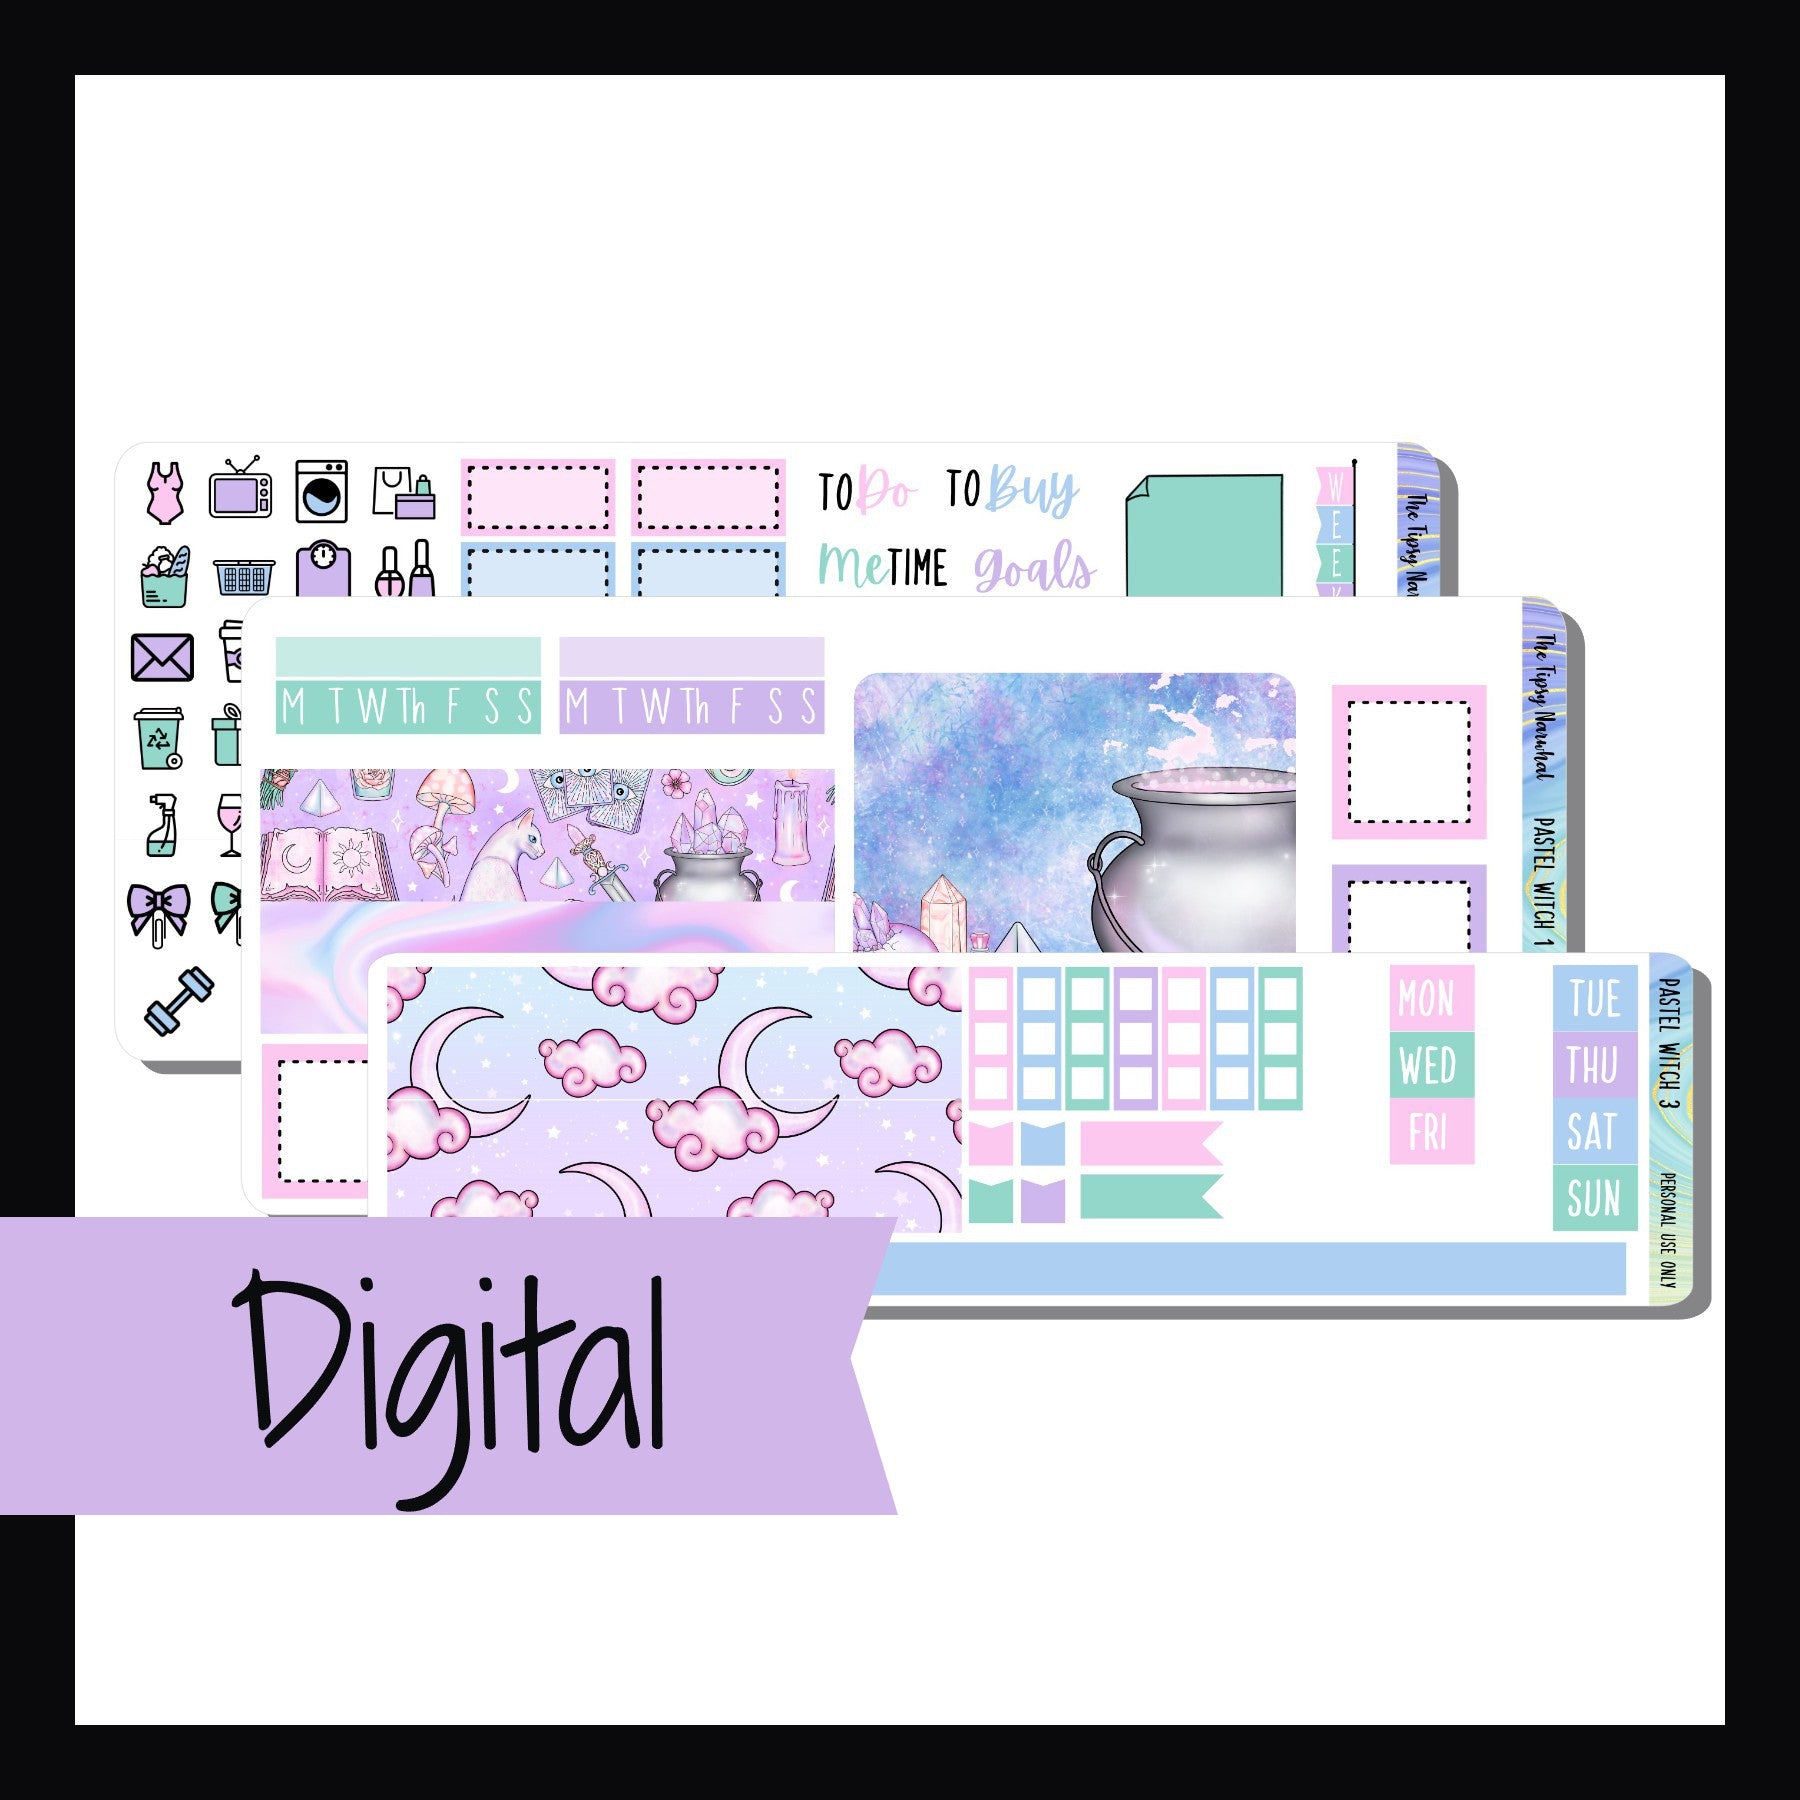 Digital Pastel Witch Hobonichi Weeks Kit is a digital/printable version of the Pastel Witch sticker kit.  This 3 page kit is sized to fit the Hobonichi Weeks and similarly sized planners. It features various witchy items mixed with soft pastel colors.